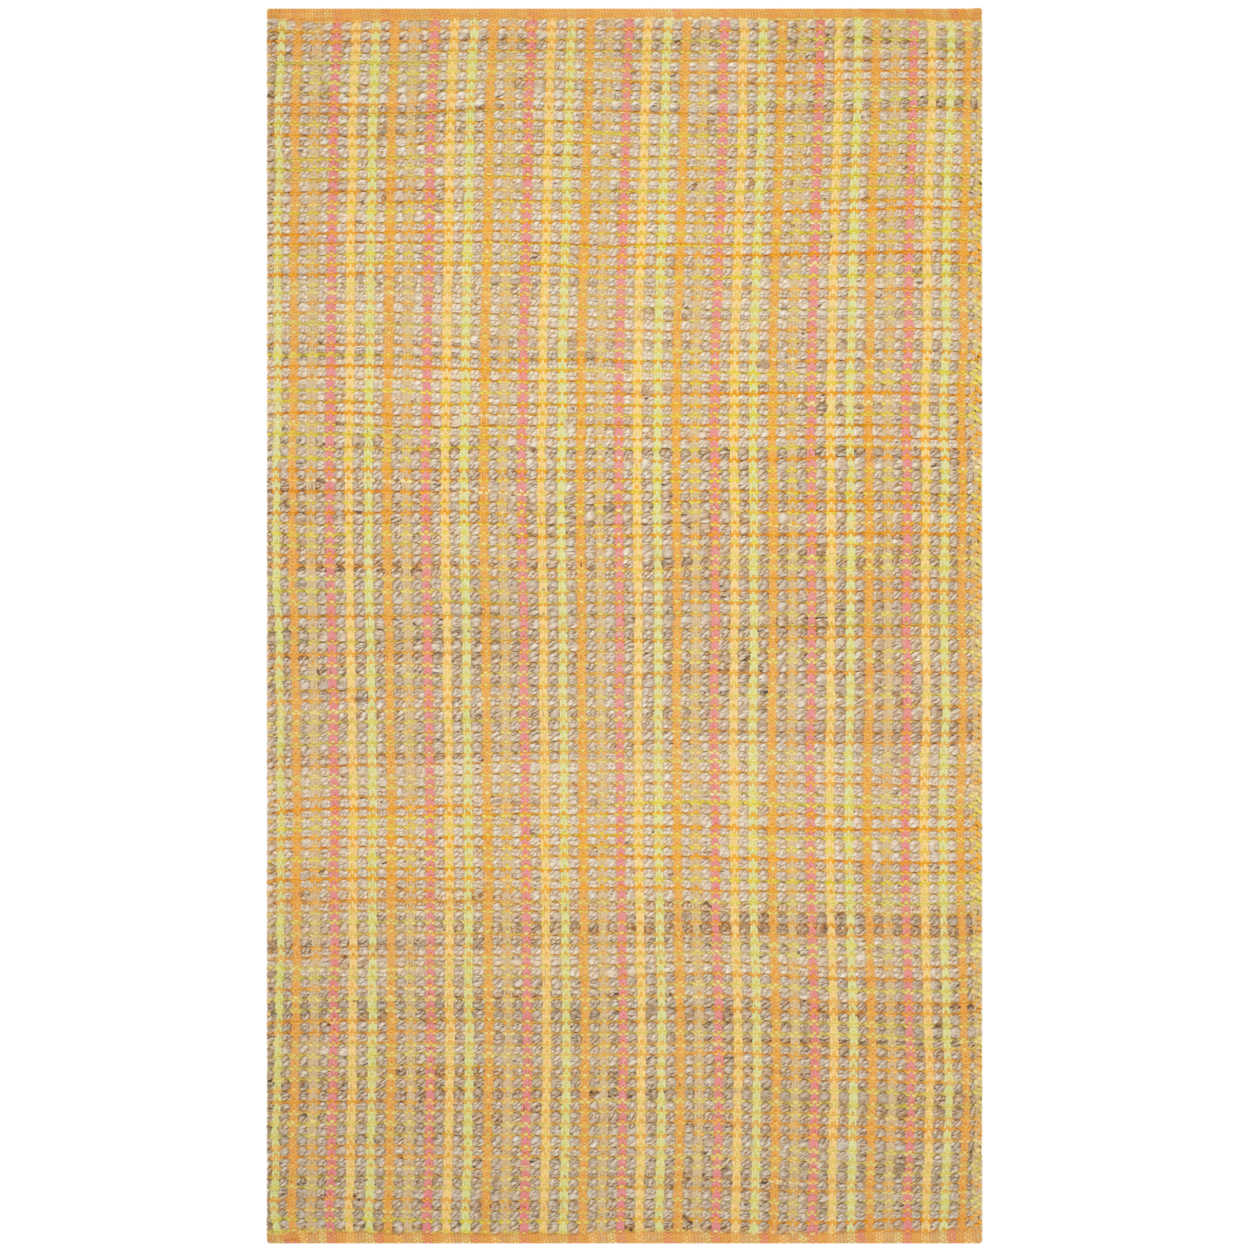 SAFAVIEH Cape Cod Collection CAP831D Handwoven Spring Rug - 5' X 8'